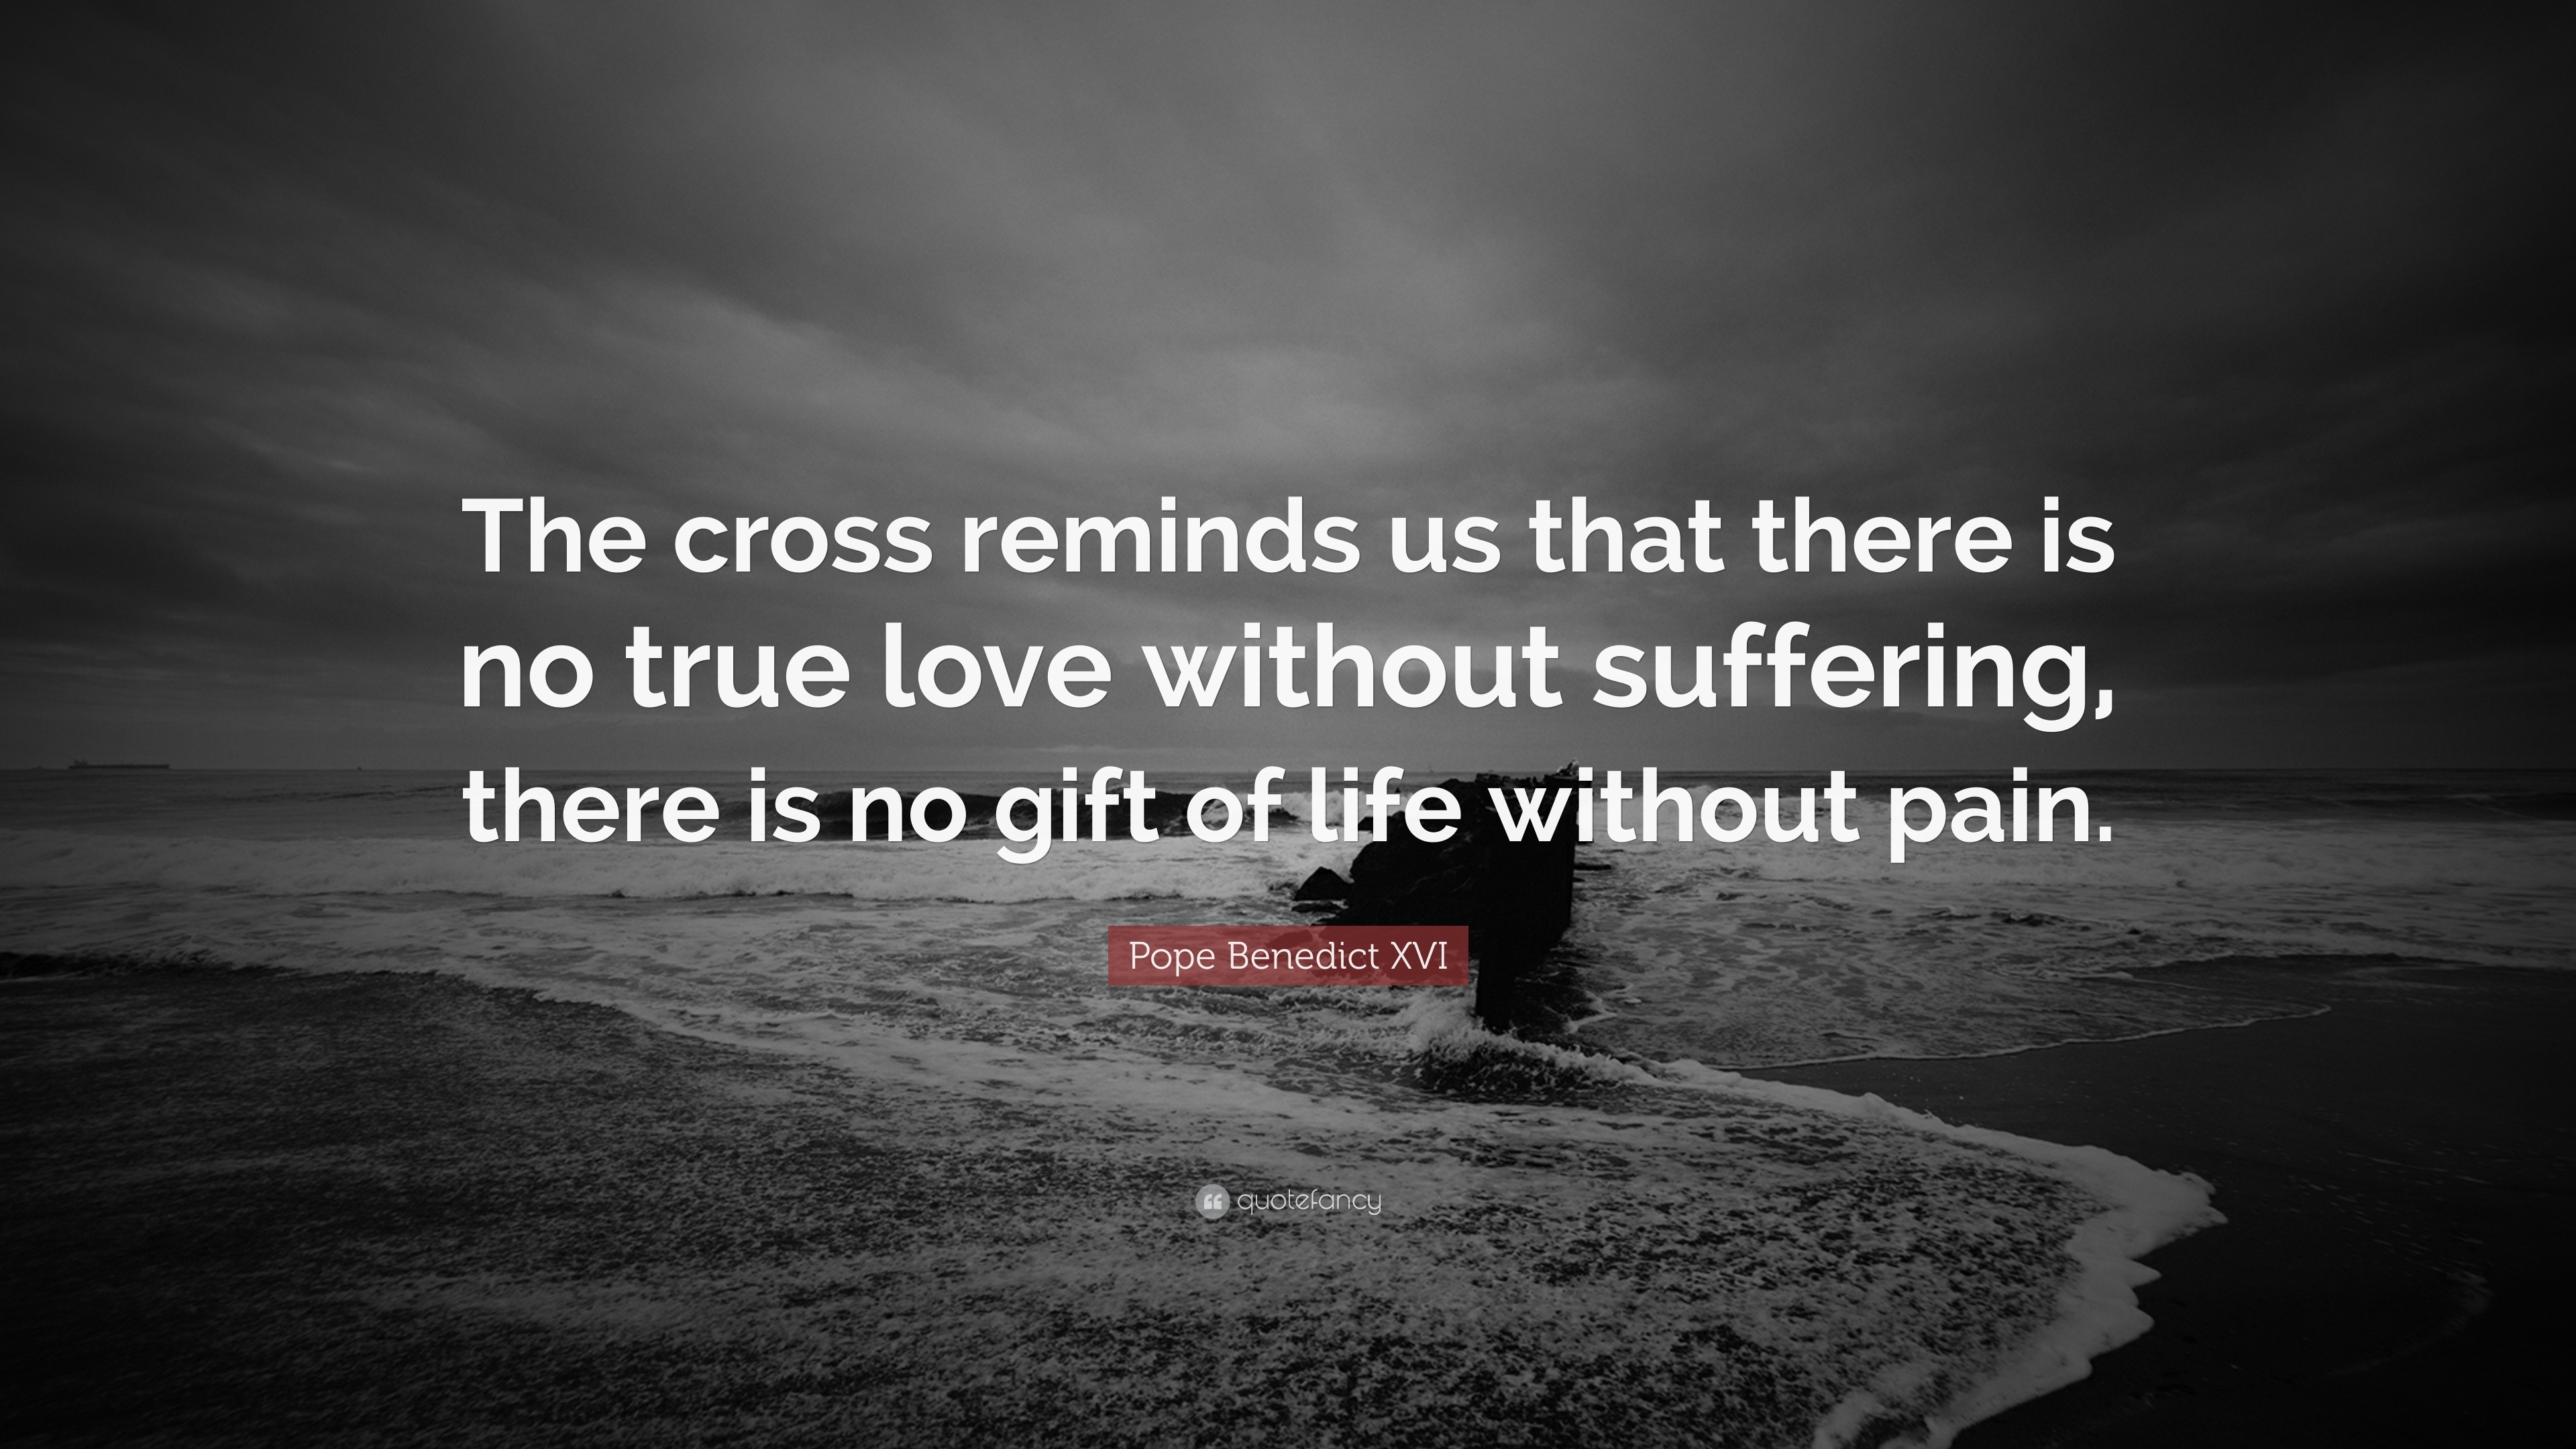 Pope Benedict XVI Quote “The cross reminds us that there is no true love